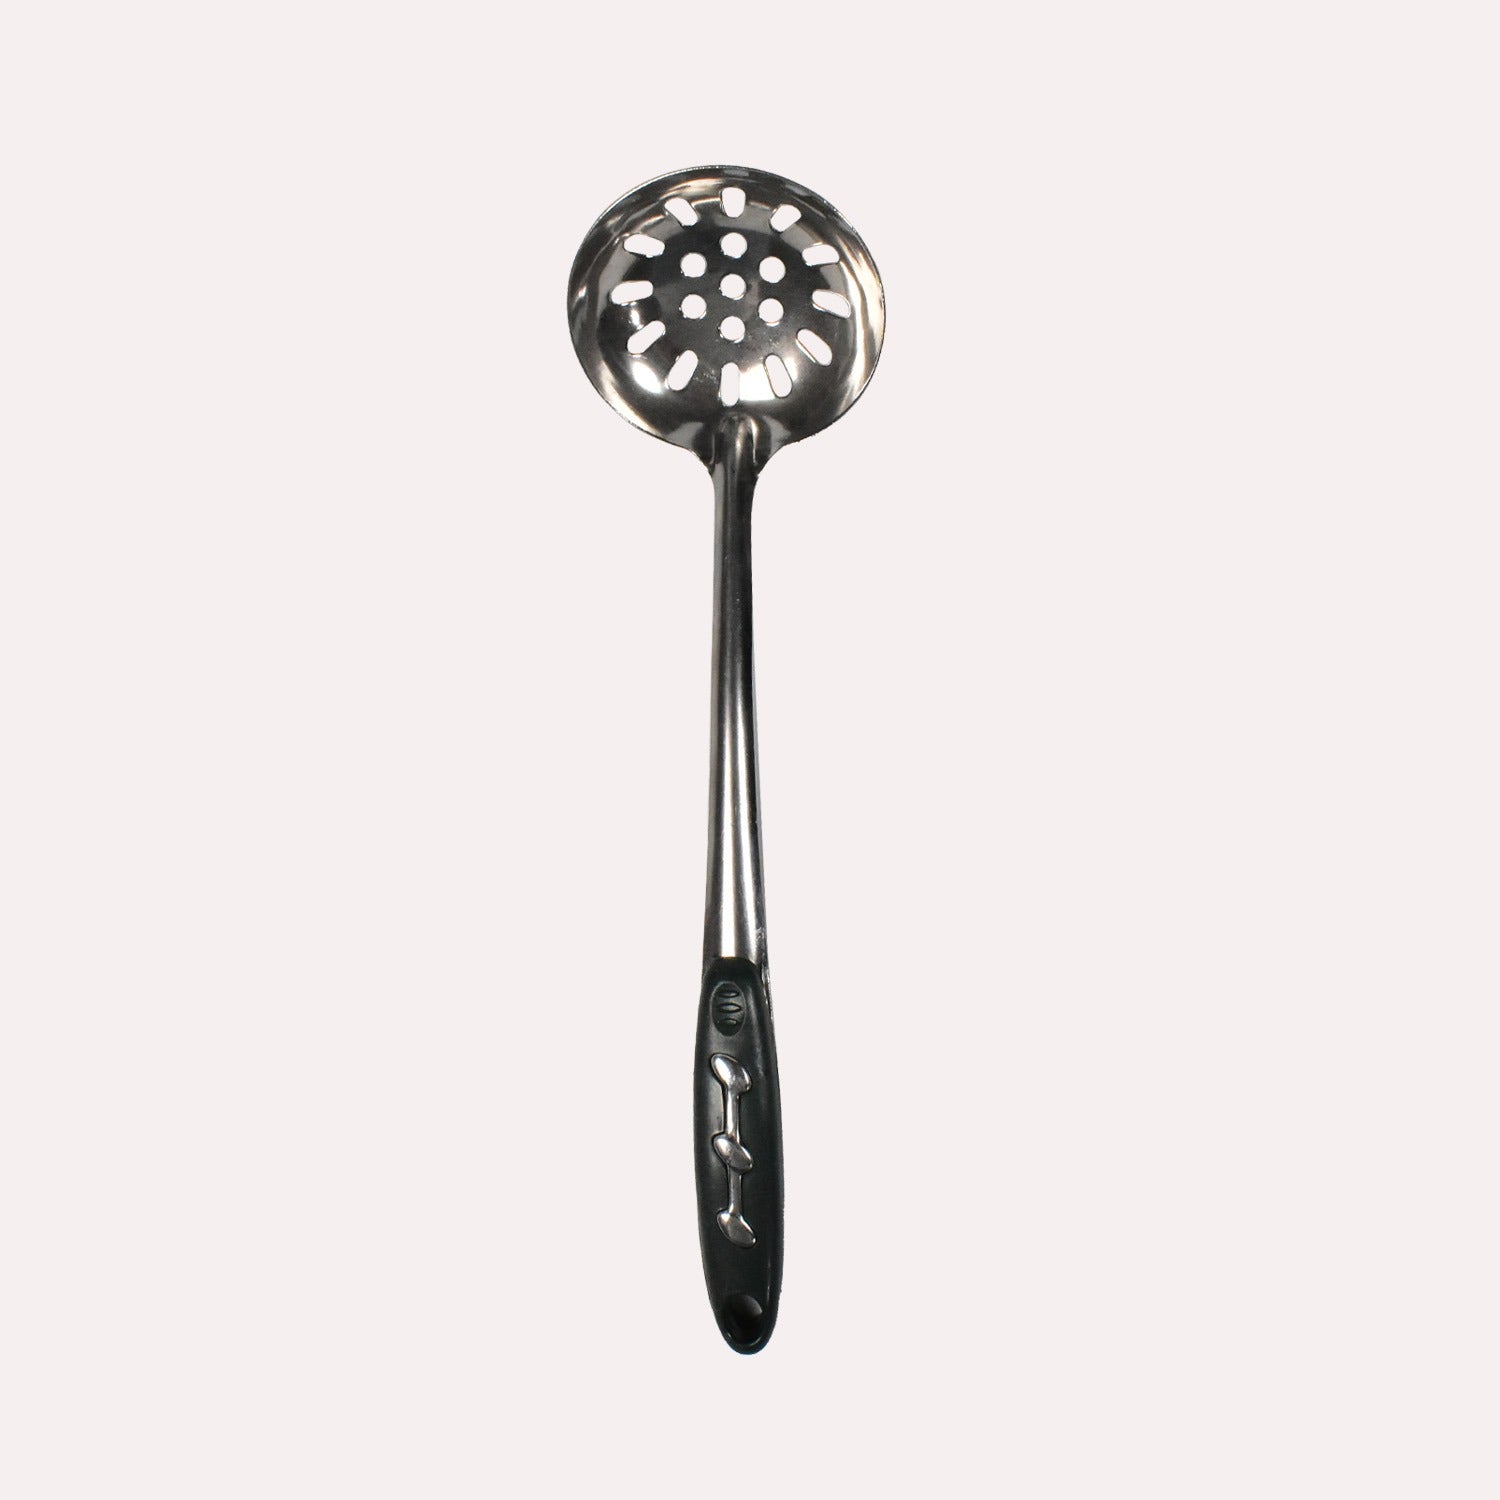 Stainless Steel Slotted Spoon with Vacuum Ergonomic Handle, Comfortable Grip Design Strainer Ladle for Kitchen Dukandaily